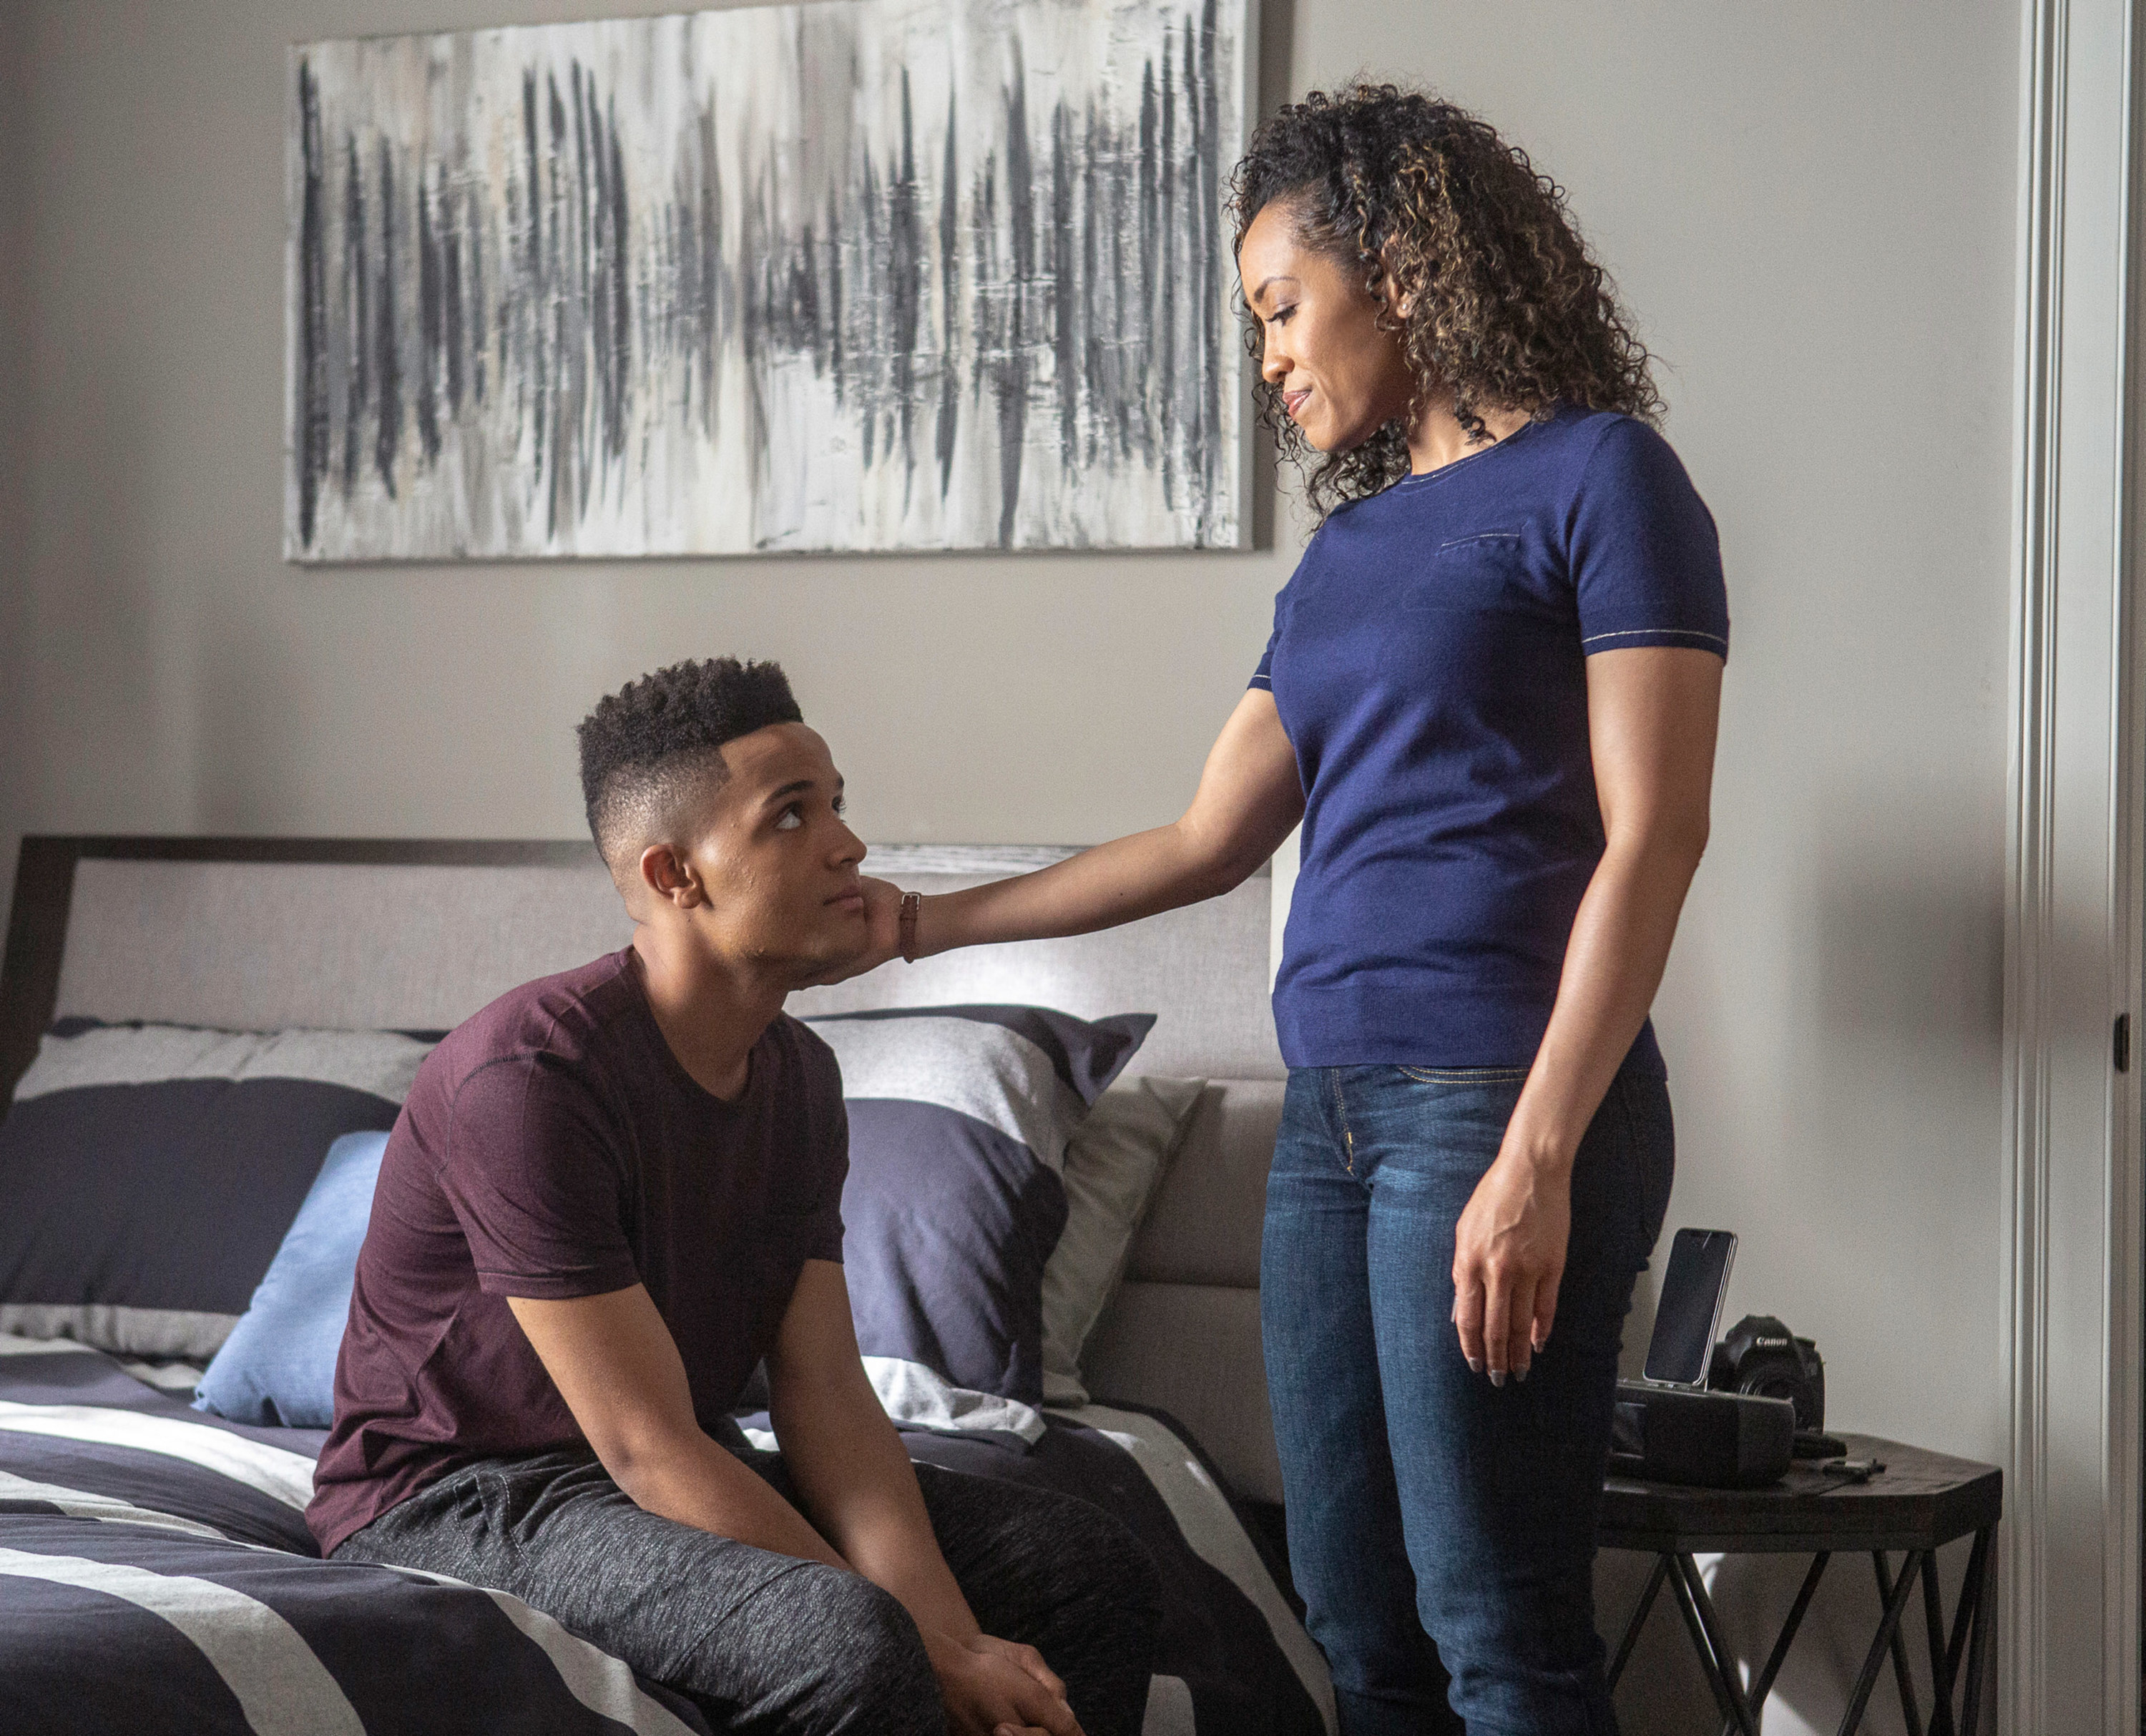 Queen Sugar scene with Nicholas sitting on a bed while another actor stands in front of him while putting her hand on his cheek